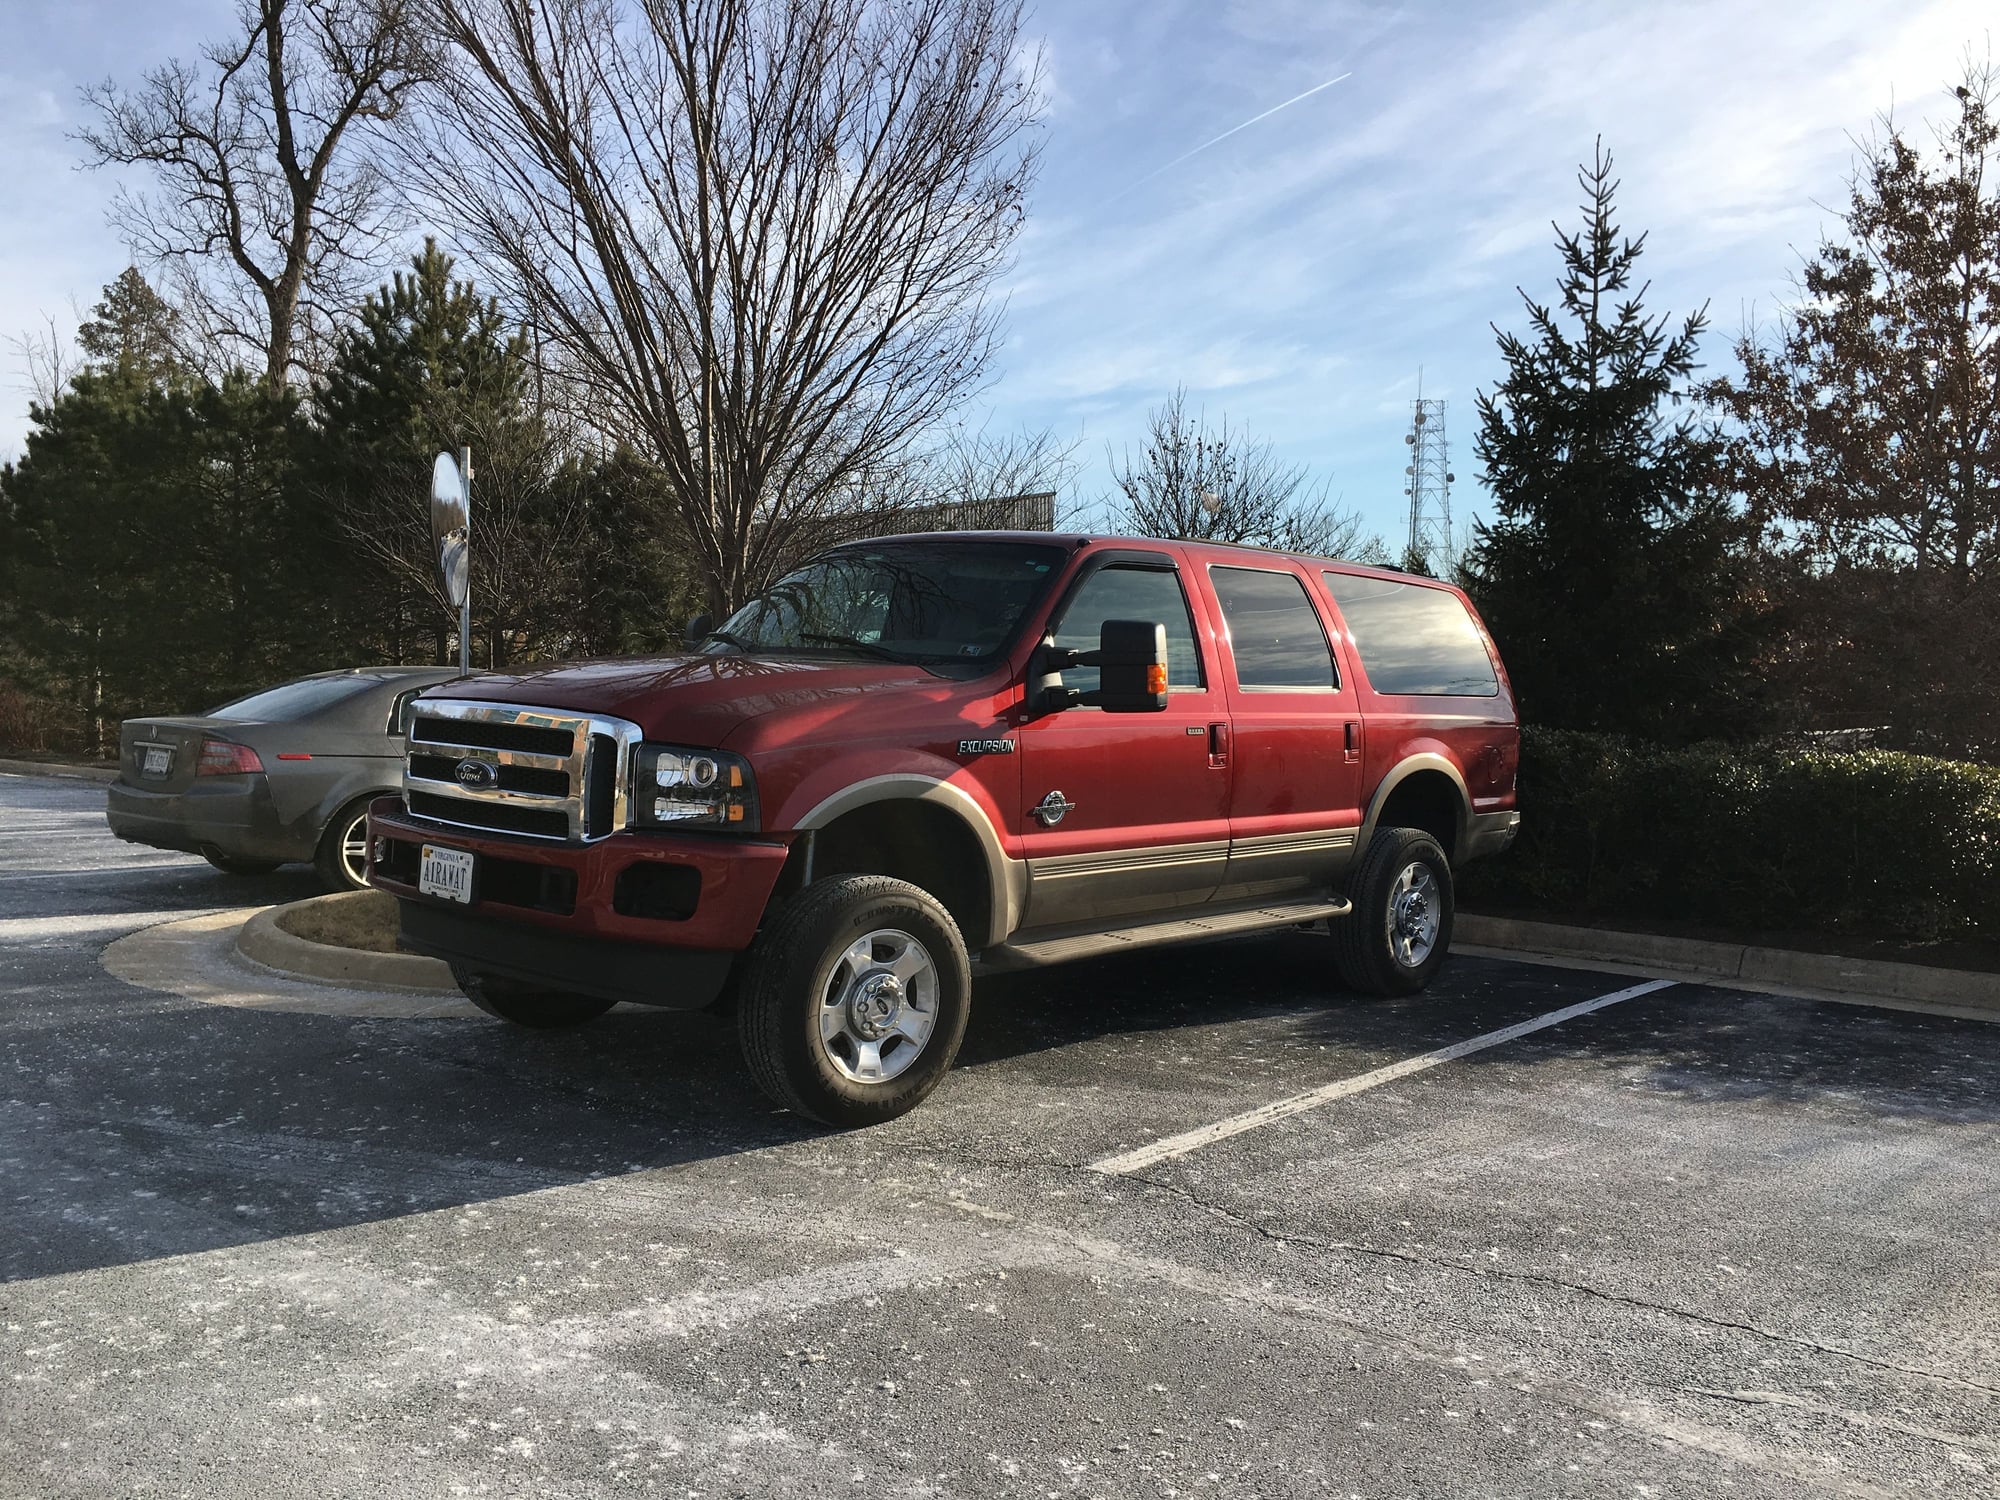 2000 Ford Excursion - 2000 Ford Excursion 7.3L PSTD - Used - VIN 1FMSU43F4YEA90588 - 205,400 Miles - 8 cyl - 4WD - Automatic - SUV - Red - Herndon, VA 20171, United States